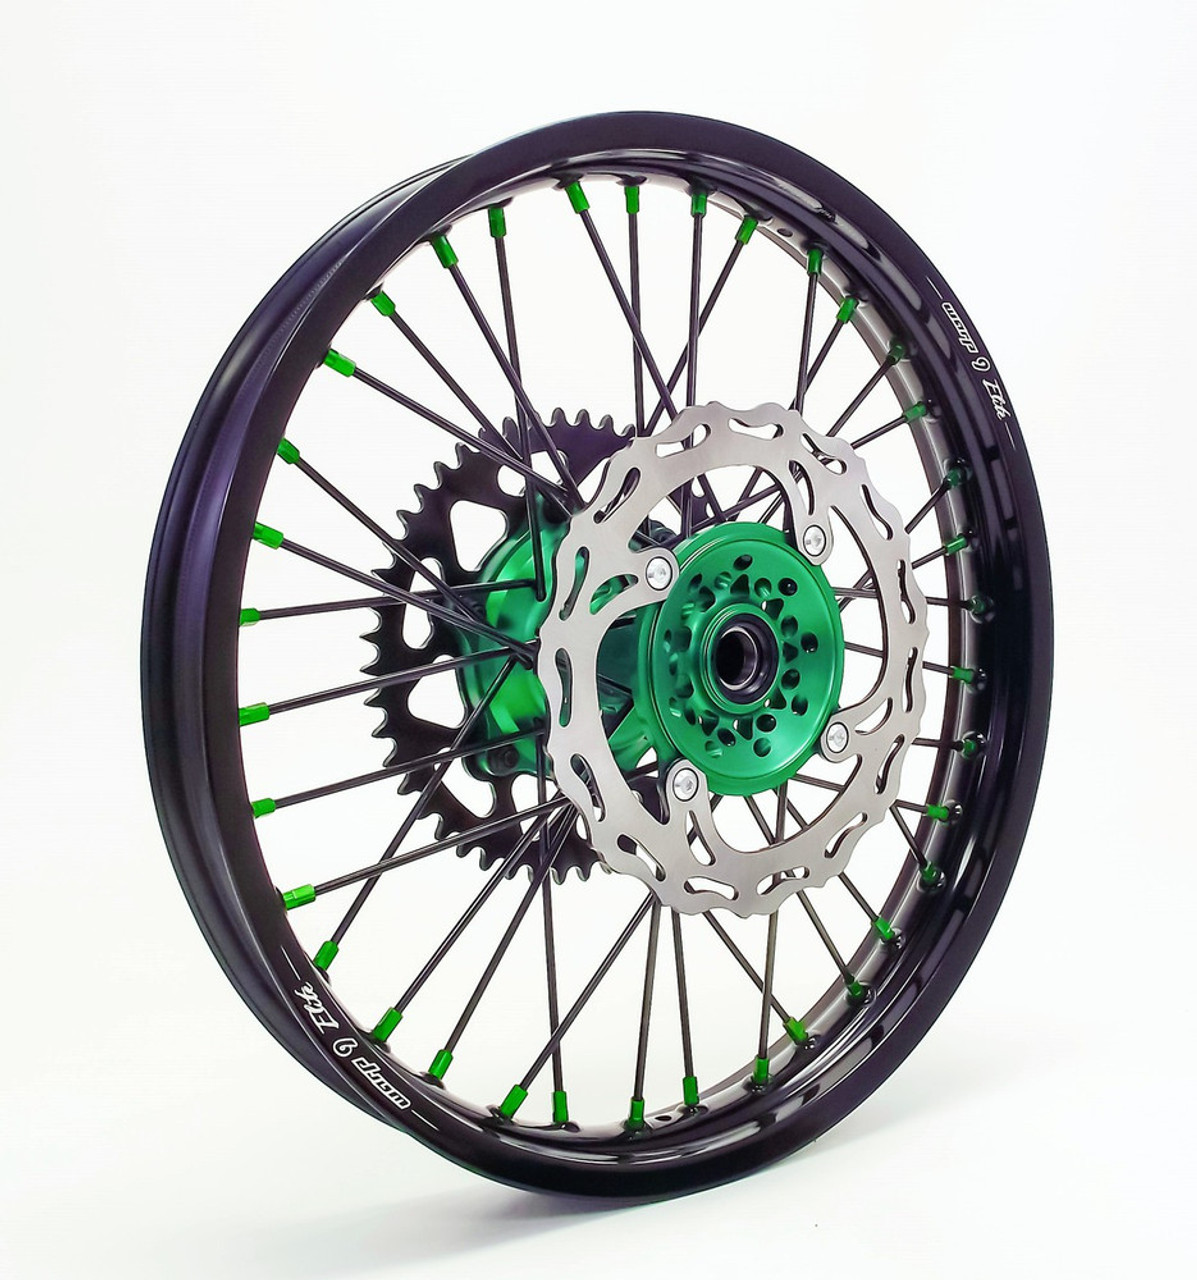 Warp 9 Rear MX Wheel with Sand Paddle Tire